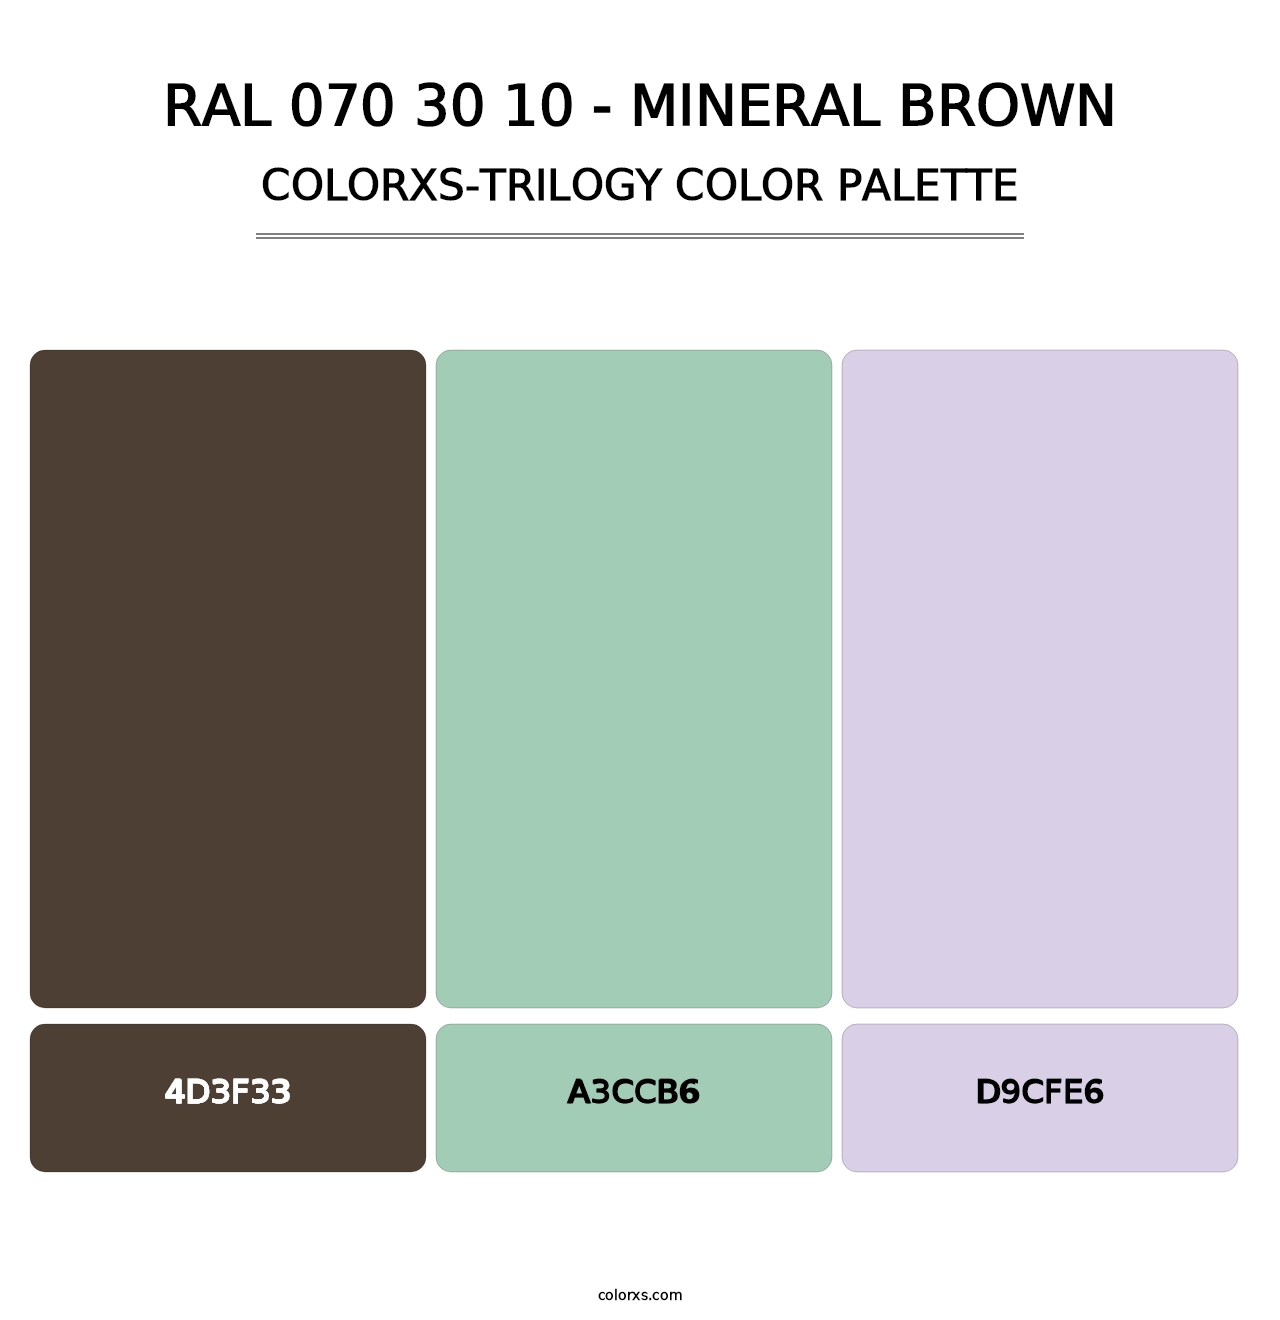 RAL 070 30 10 - Mineral Brown - Colorxs Trilogy Palette